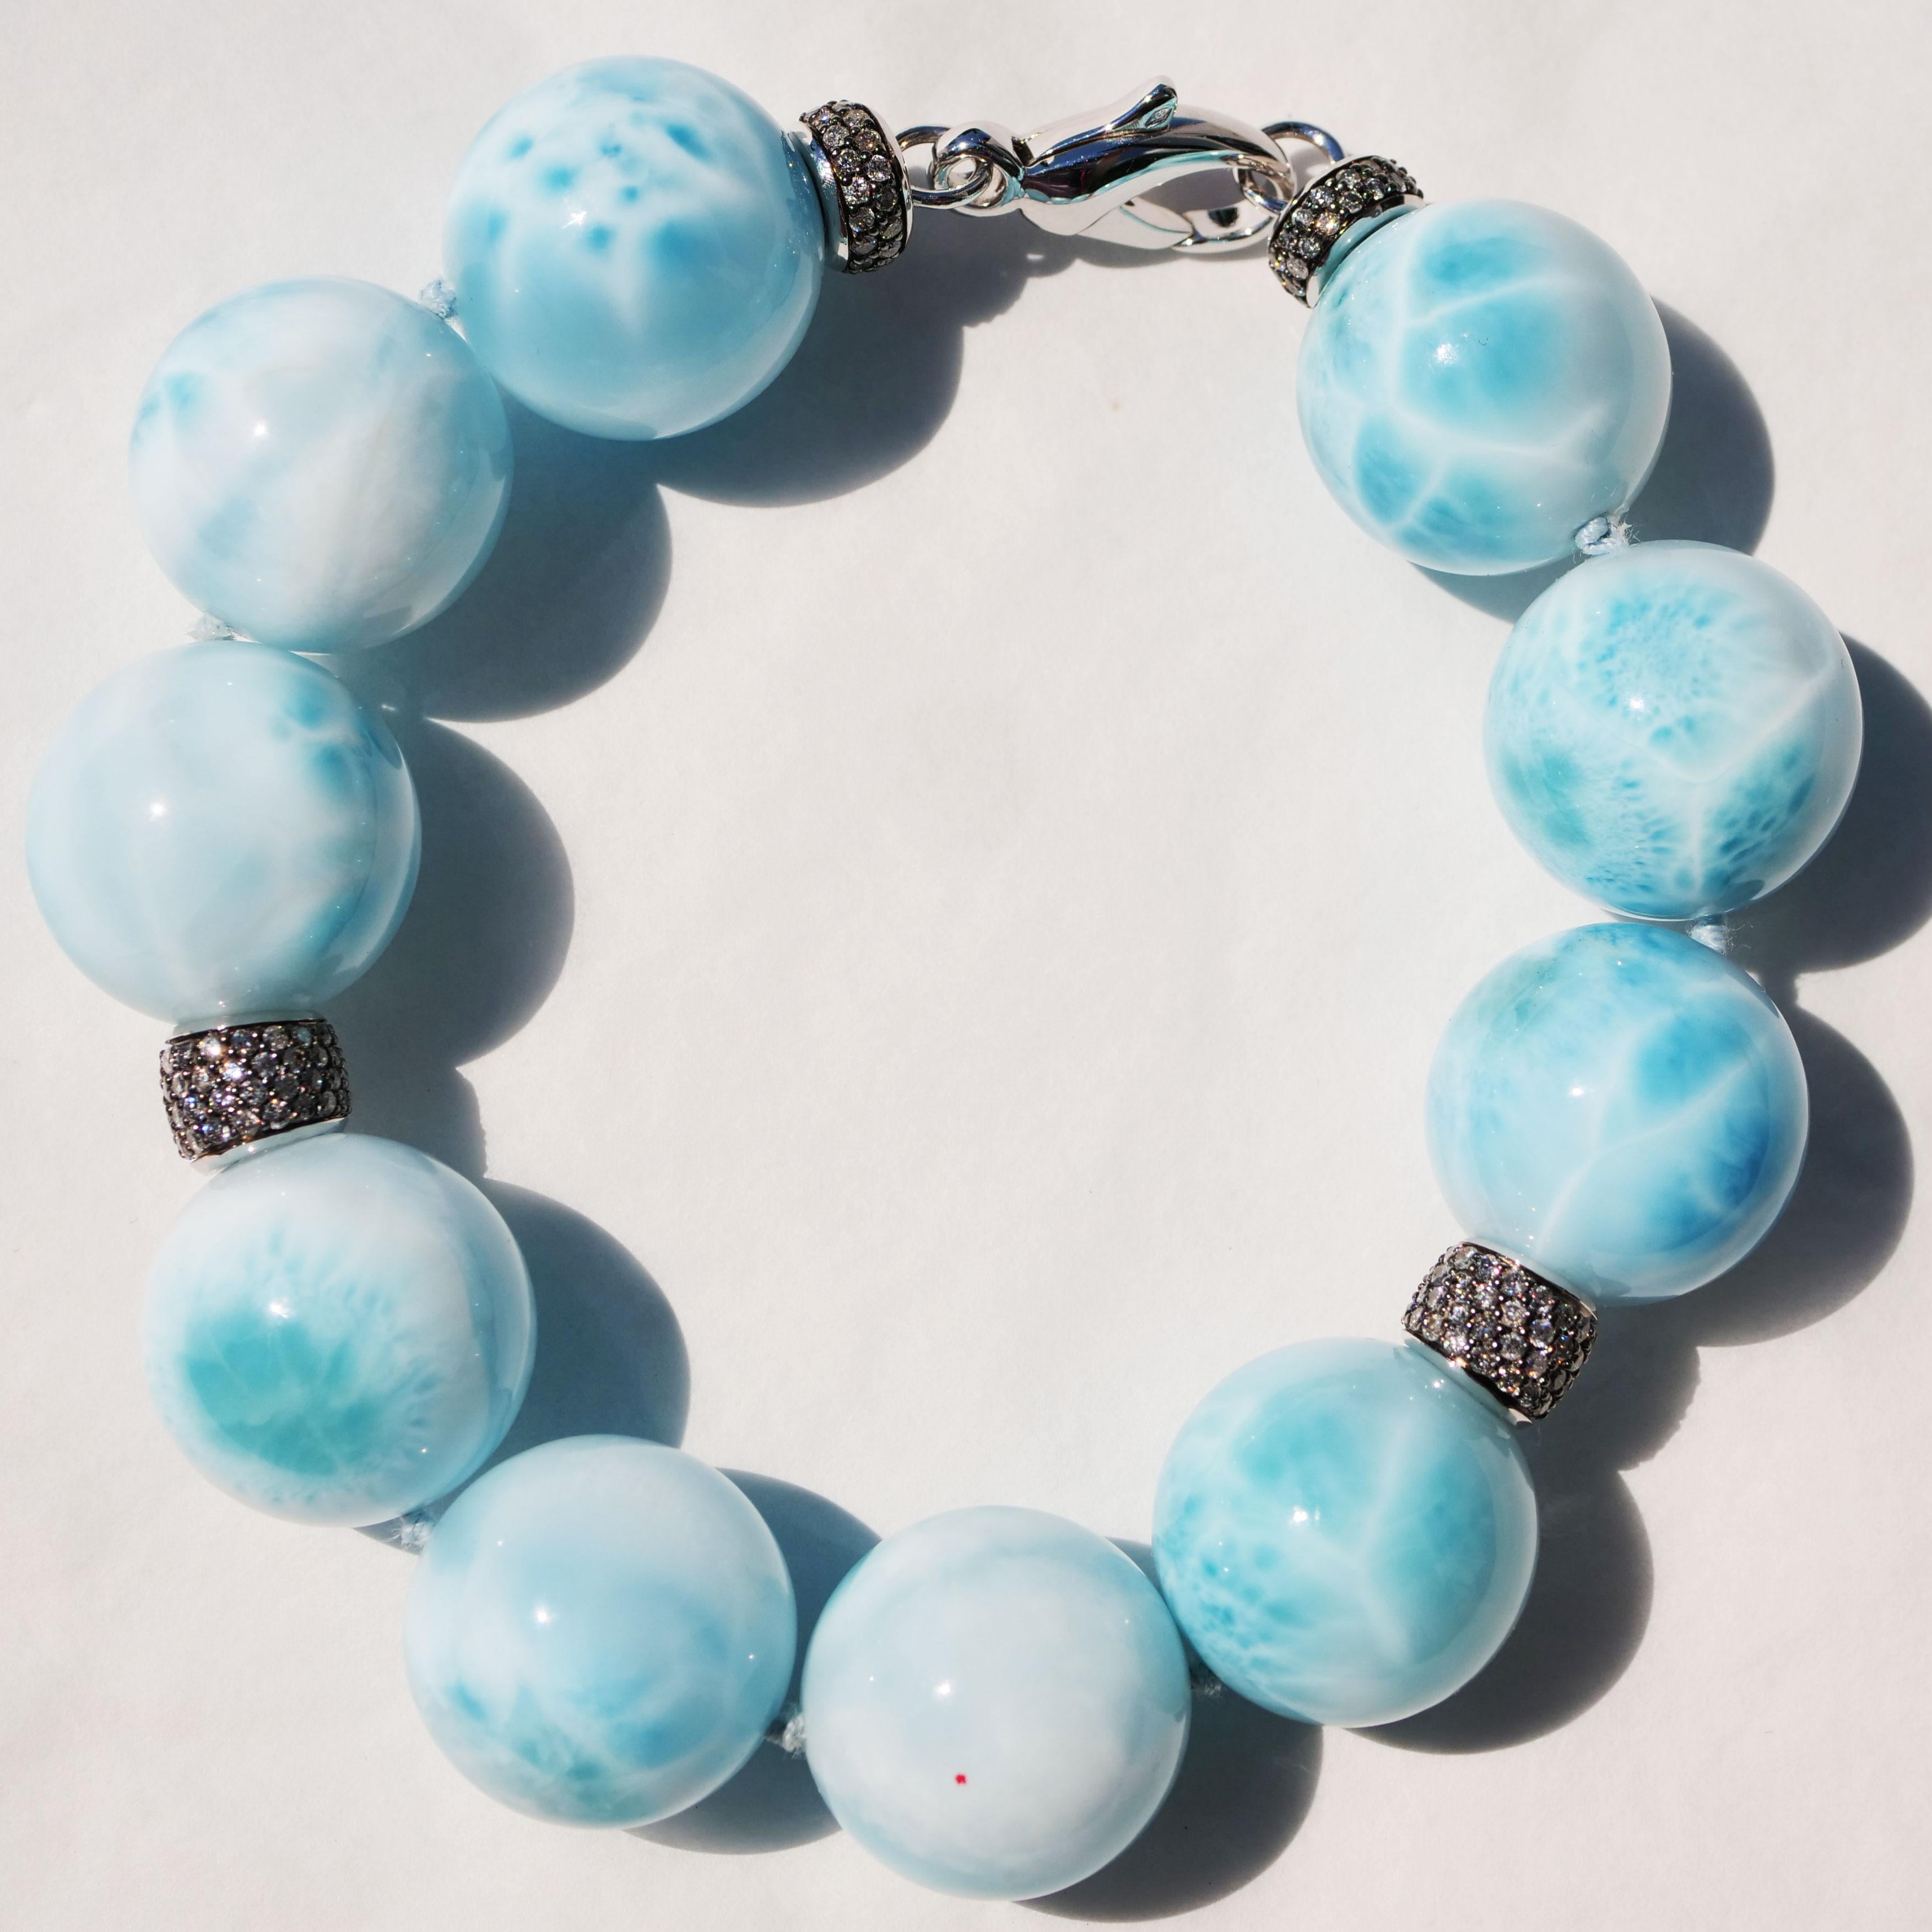 Larimar Ball Bracelet with 2.37 ct Grey Diamonds Skyblue Cloudy Beauty AAA+ 20mm For Sale 3